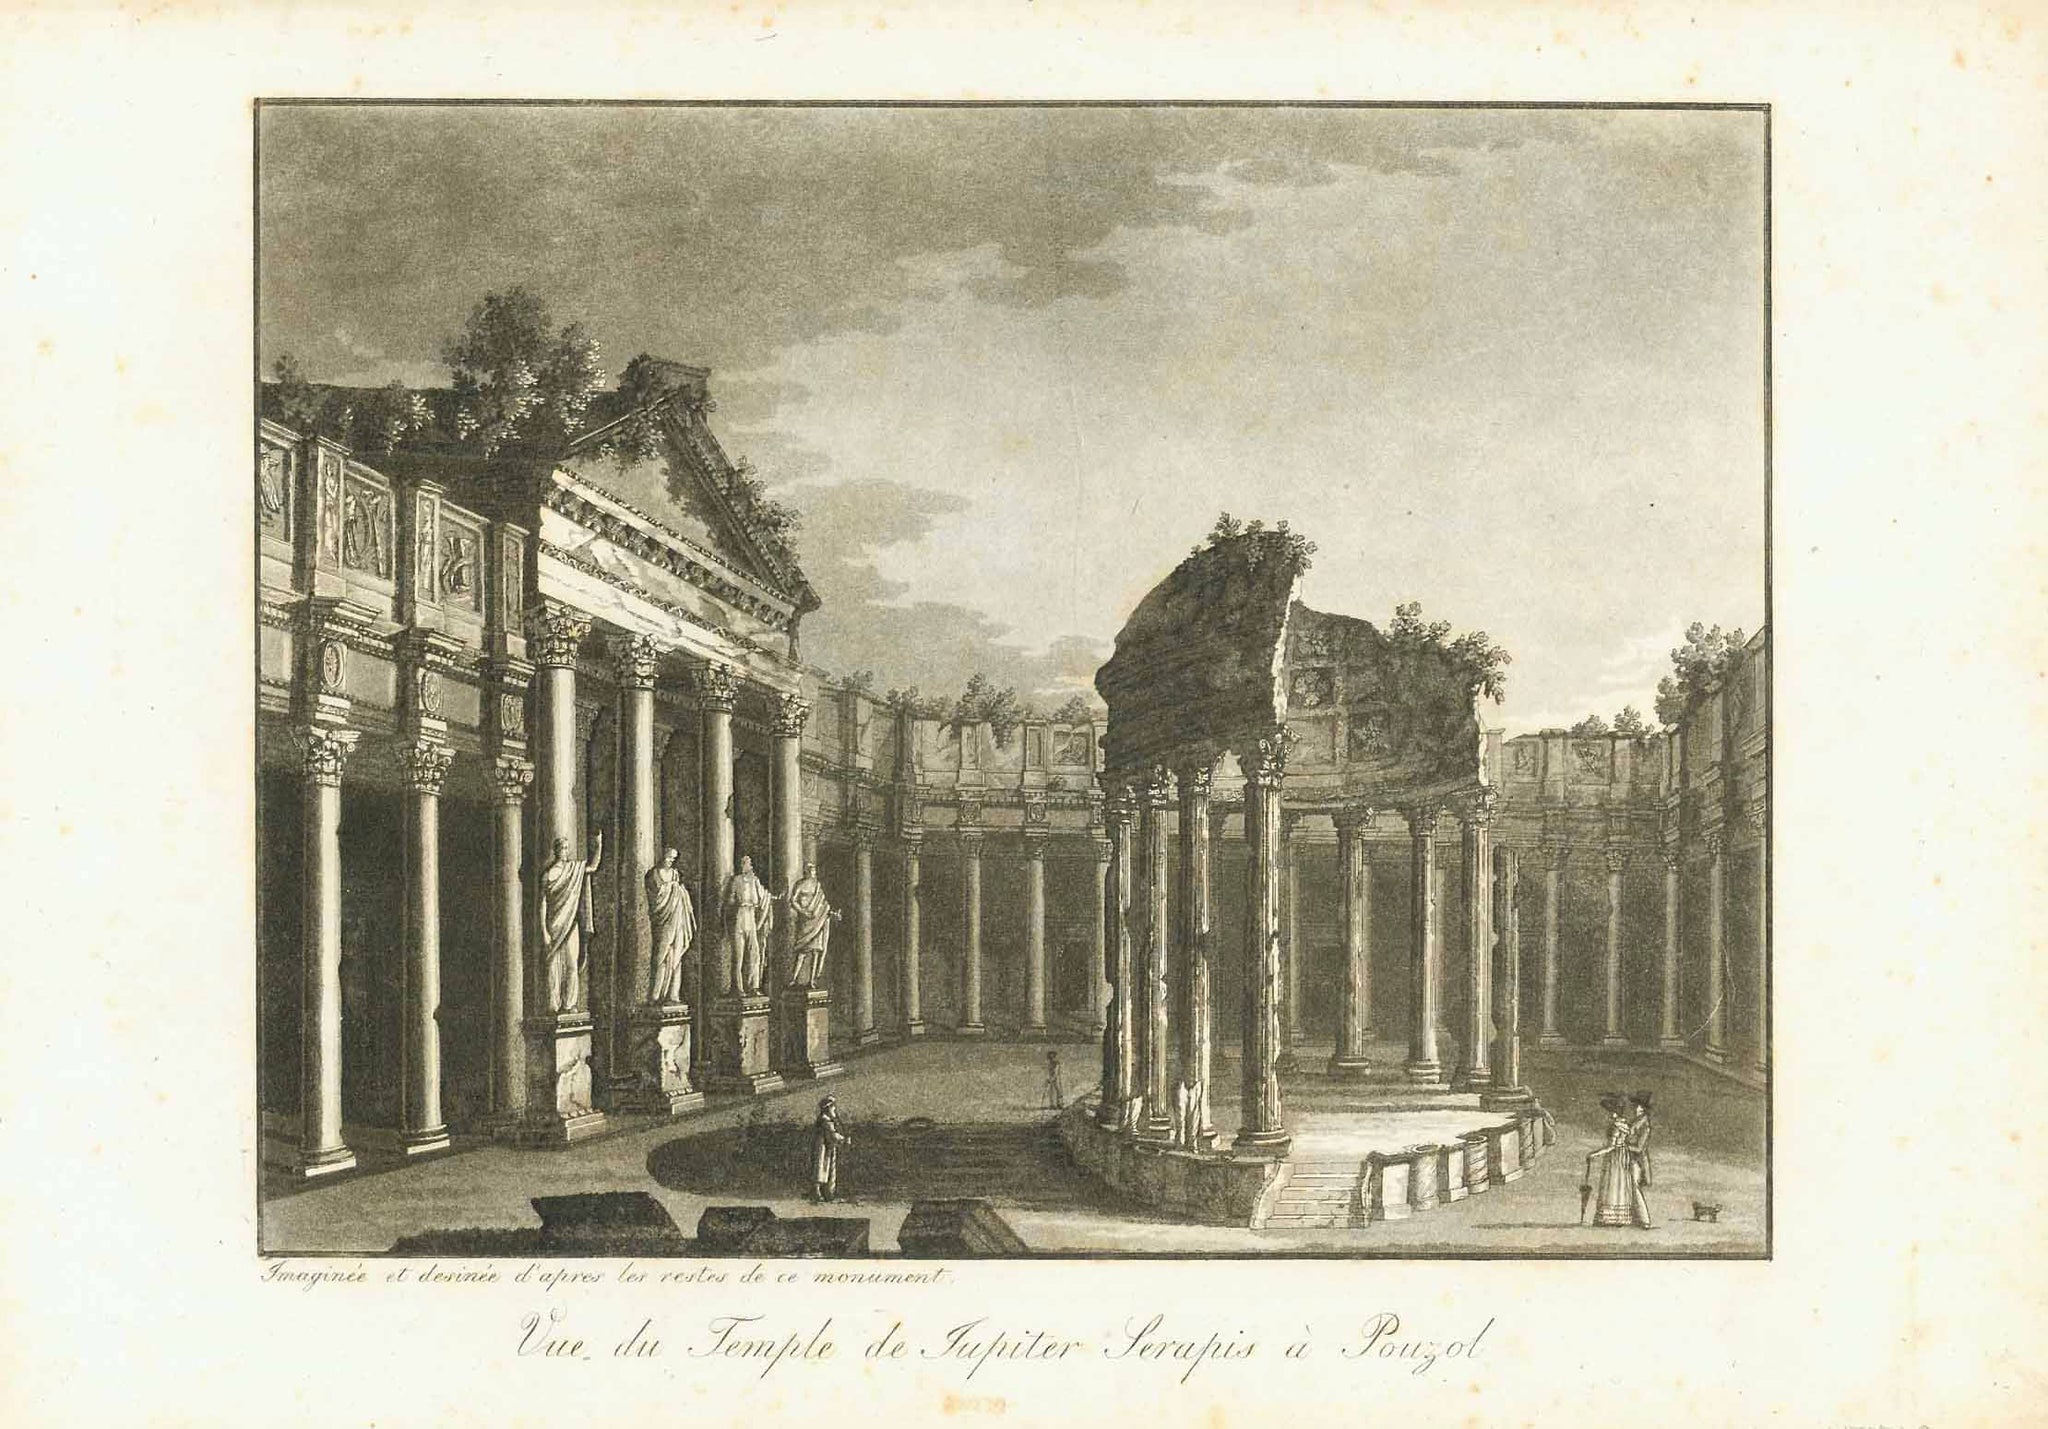 Pozzuoli. - "Vue du Temple de Jupiter Serapis a Pouzol"  Anonymous aquatint copper etching  Ca. 1821  This view is a reconstruction of the ãMacellum" of the Roman colony of Puteoli, the antique market place of what is now called Pozzuoli on the Gulf of Naples. This market was built in the second century A.D. It was destroyed by various earth quakes. When excavated in the 18th century only remnants were found in an architectural arrangement, however, that it allowed reconstruction.